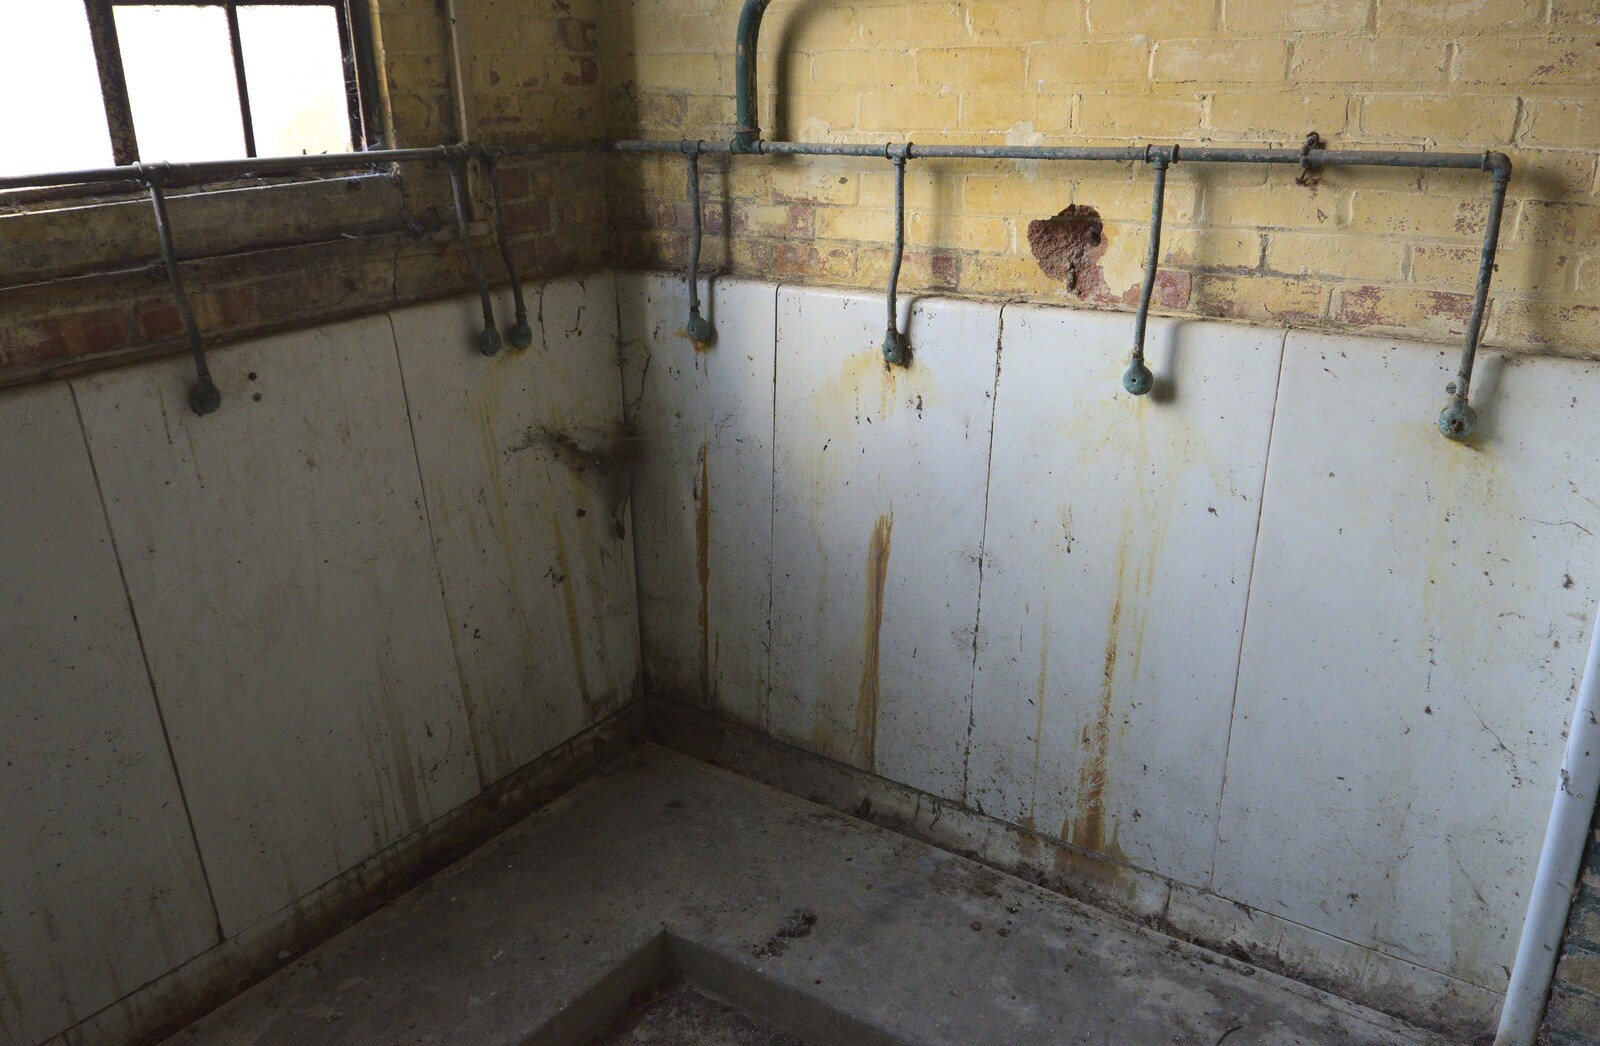 A row of original wall urinals from A 1940s Timewarp, Site 4, Bungay Airfield, Flixton, Suffolk - 9th June 2022